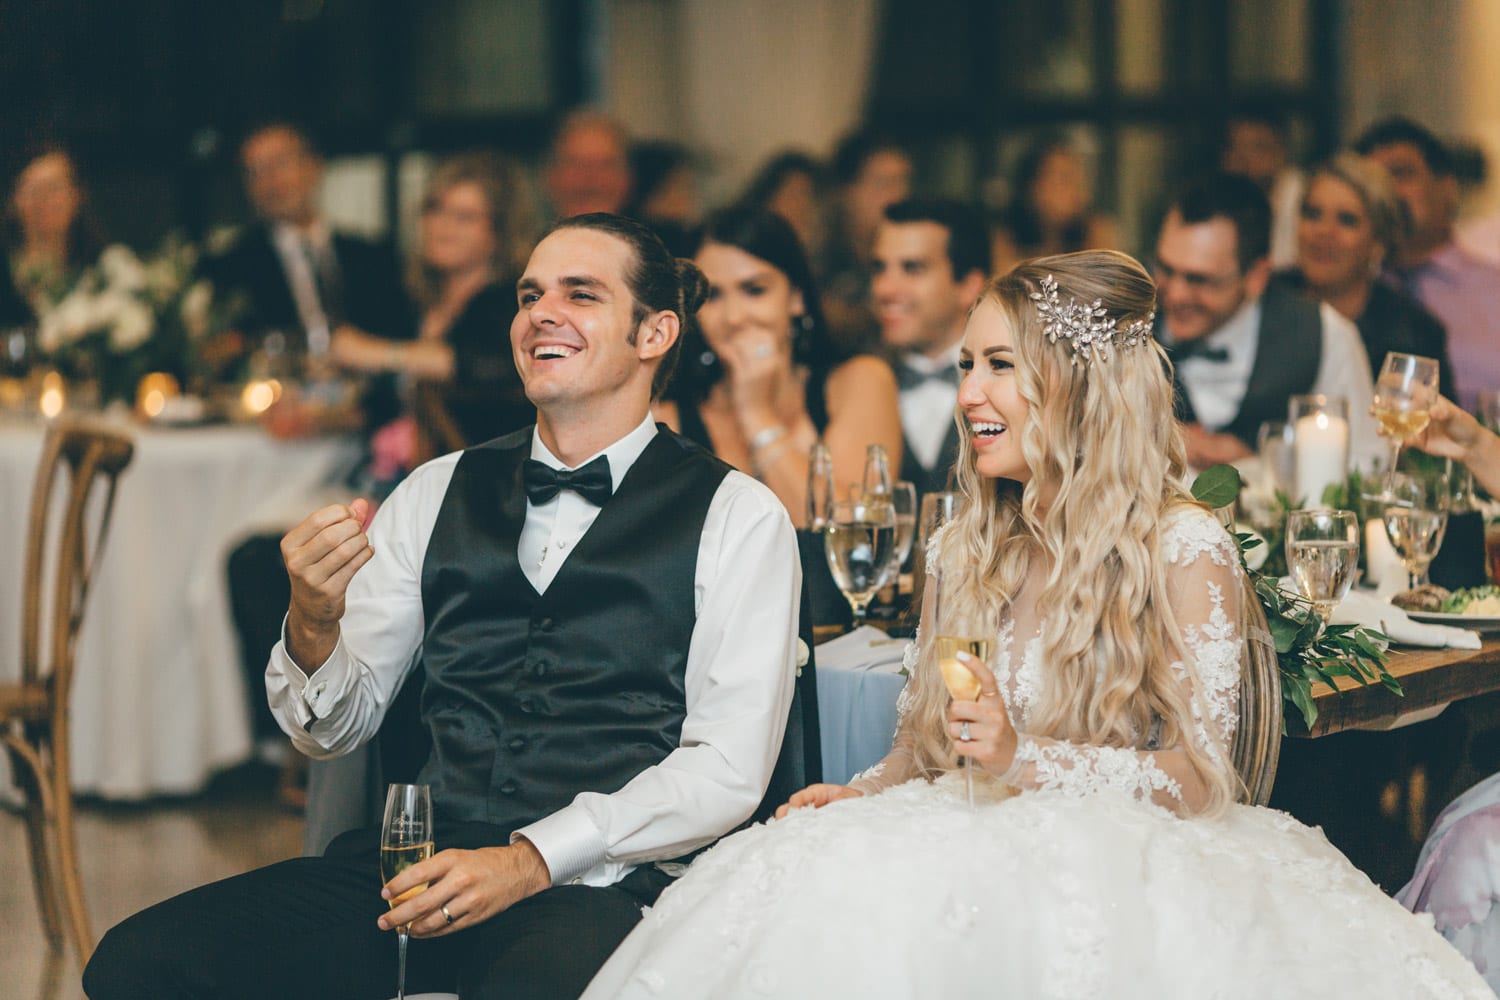 Bride and groom laugh together during dinner speech